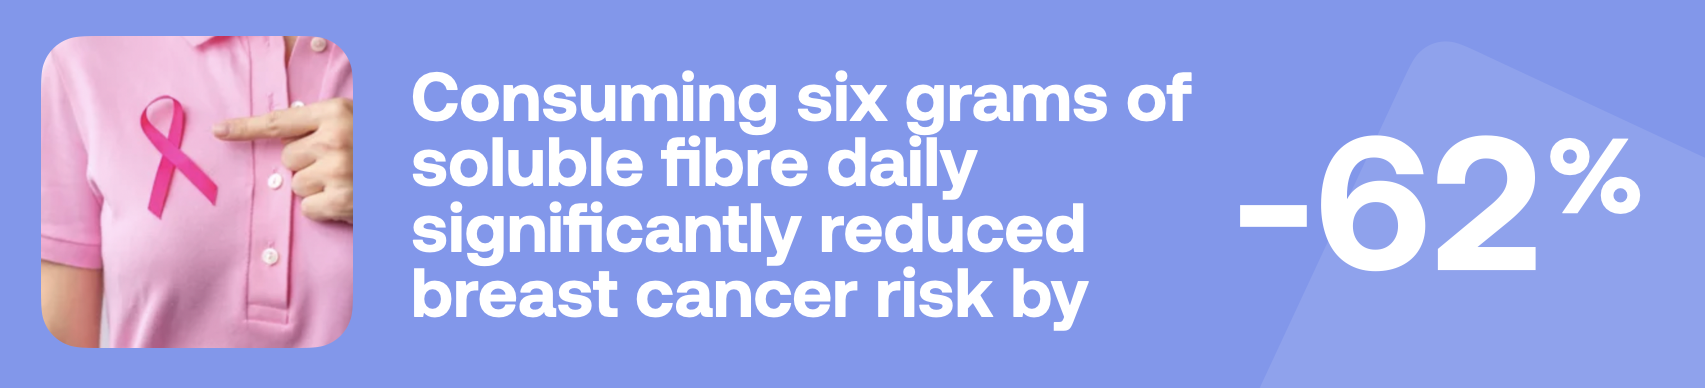 Consuming six grams of soluble fibre daily significantly reduced breast cancer risk by -62%